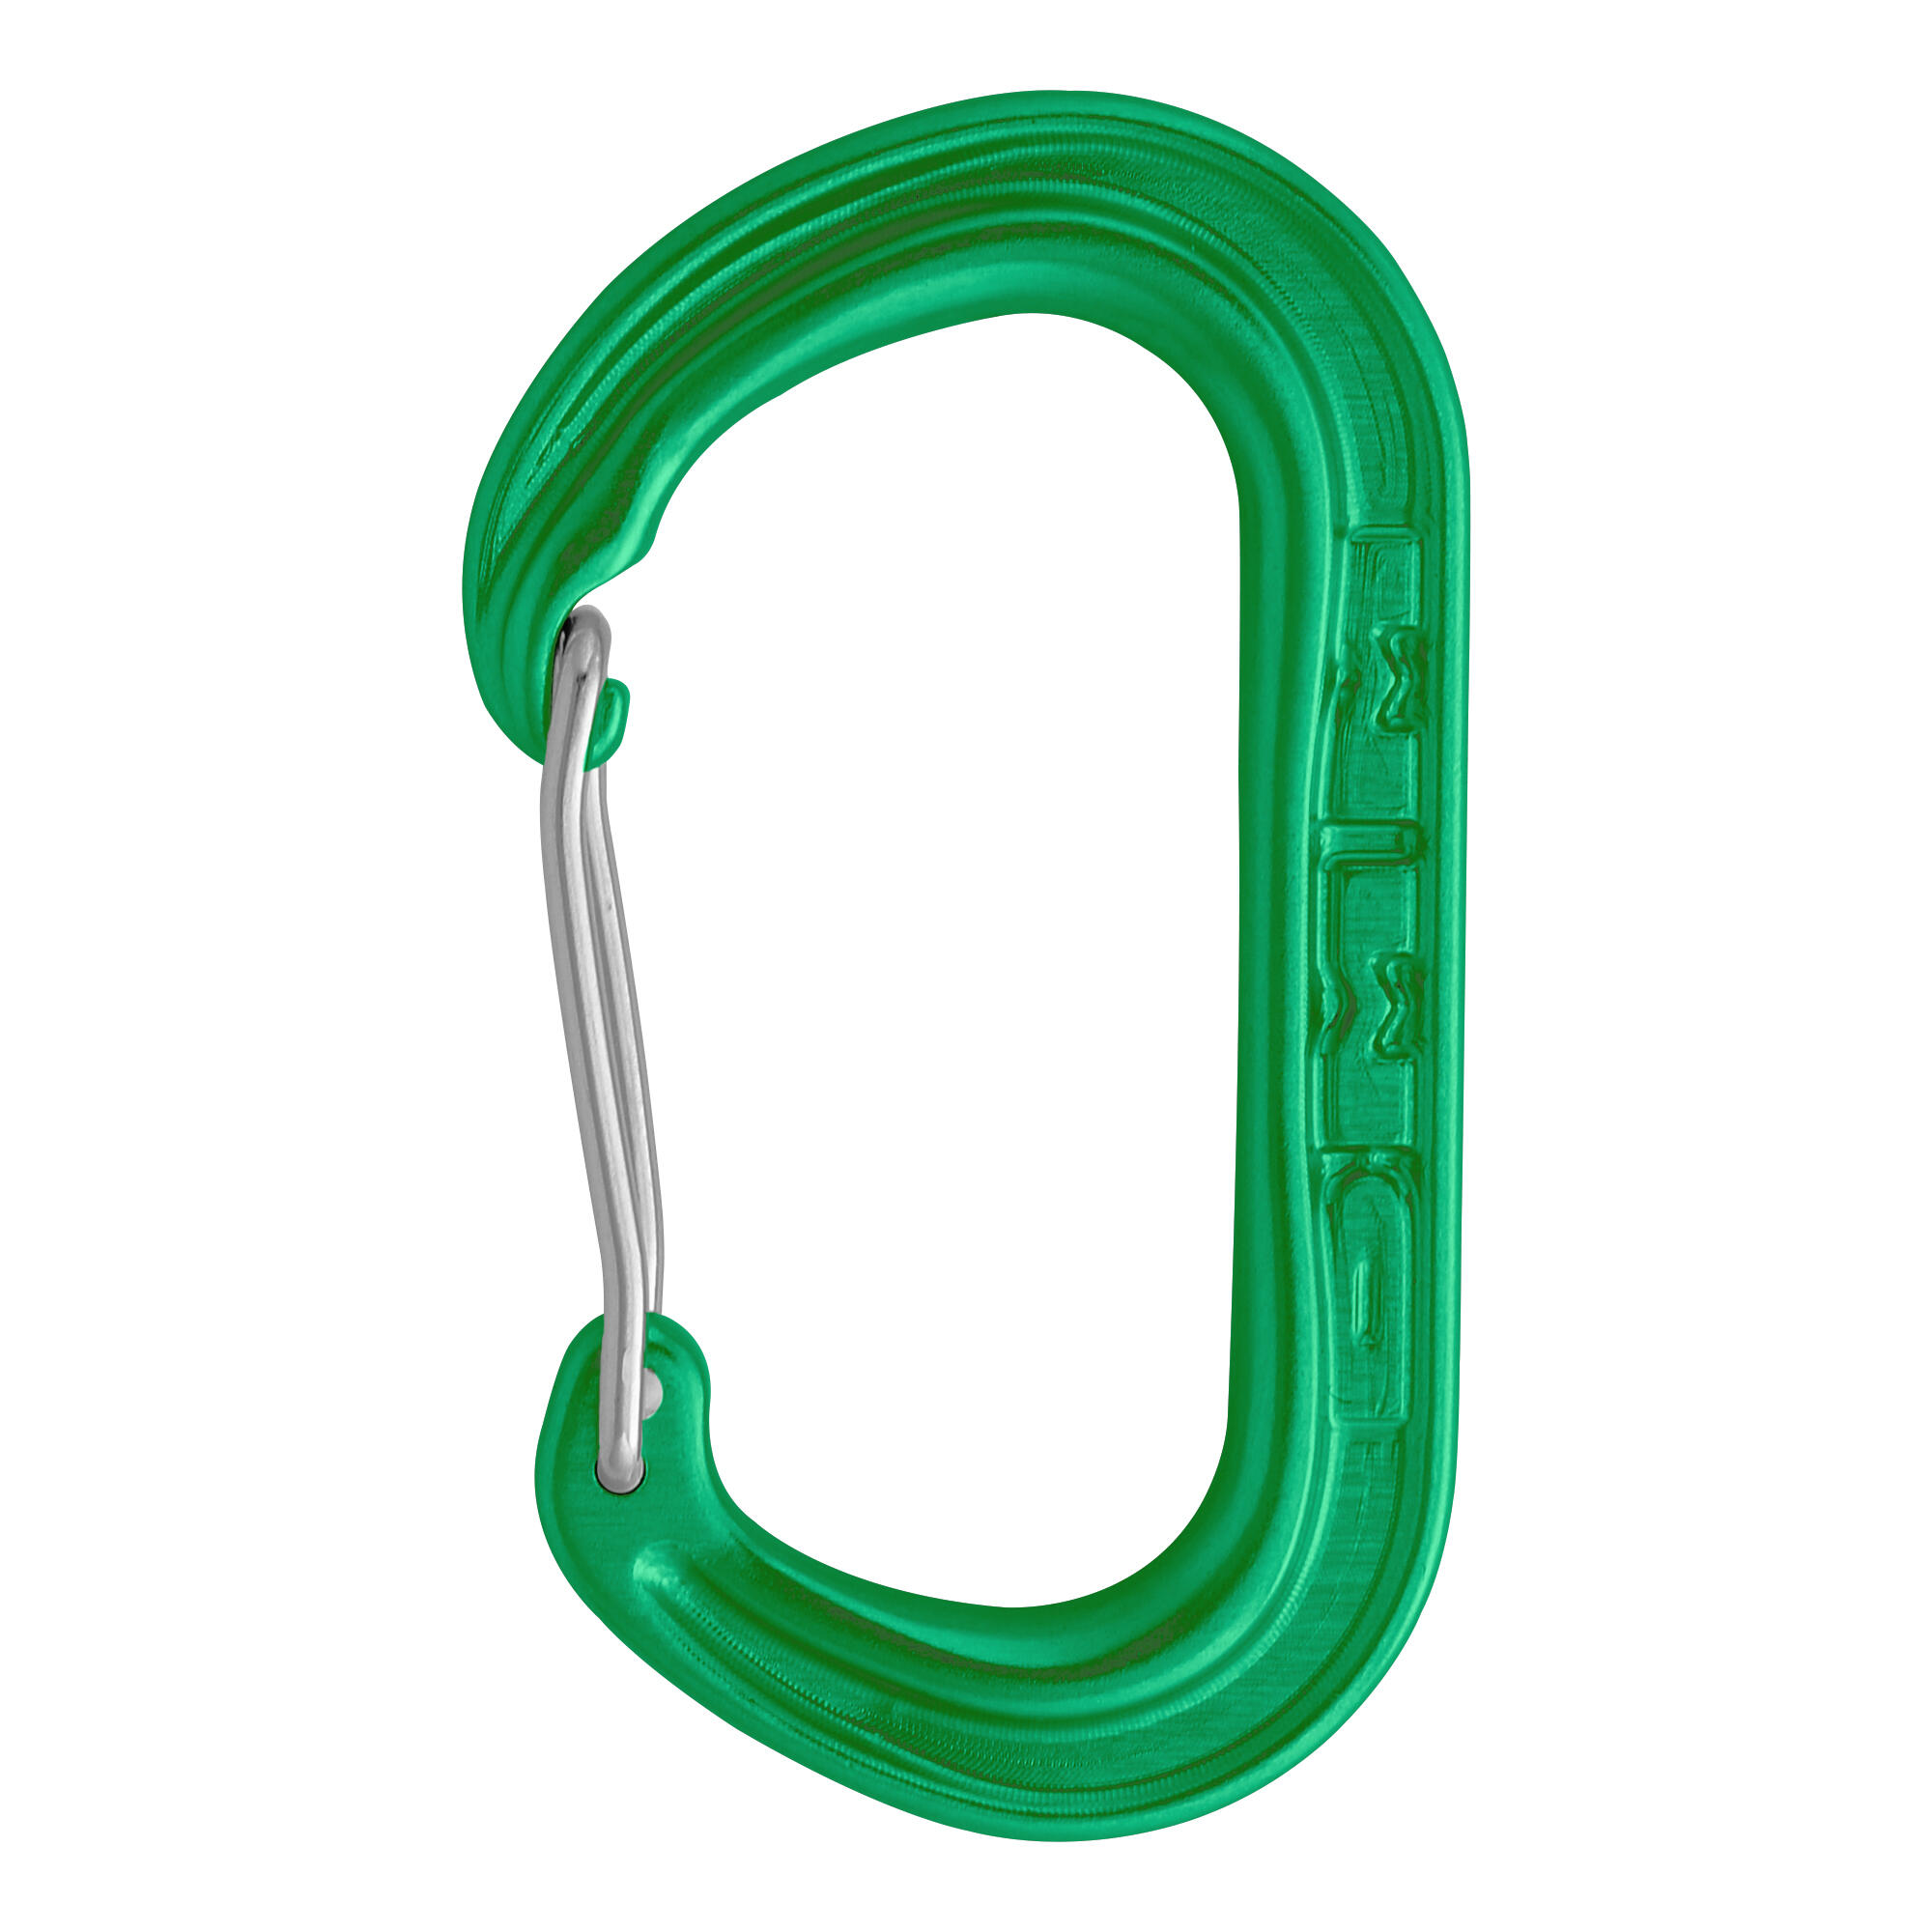 DMM XSRE Wire Accessory Carabiner - Green